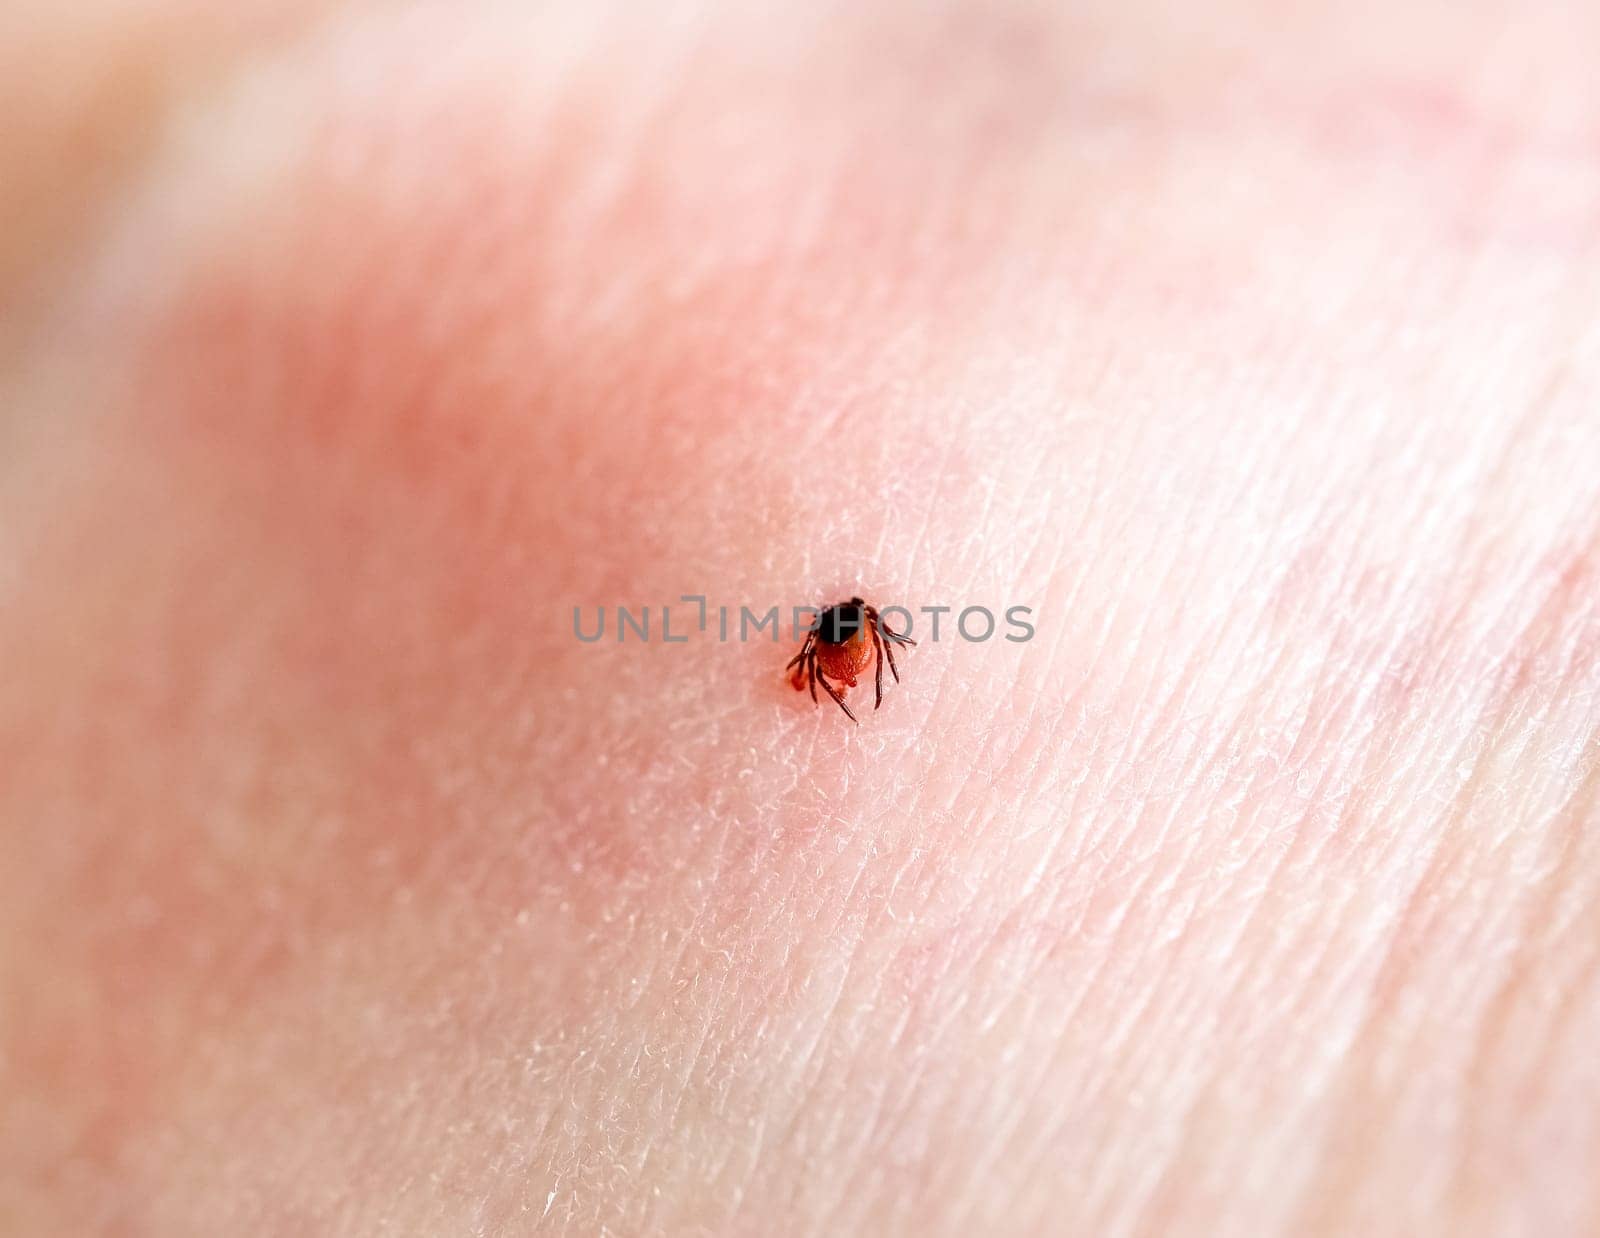 A tick embedded in a person skin. by Nataliya